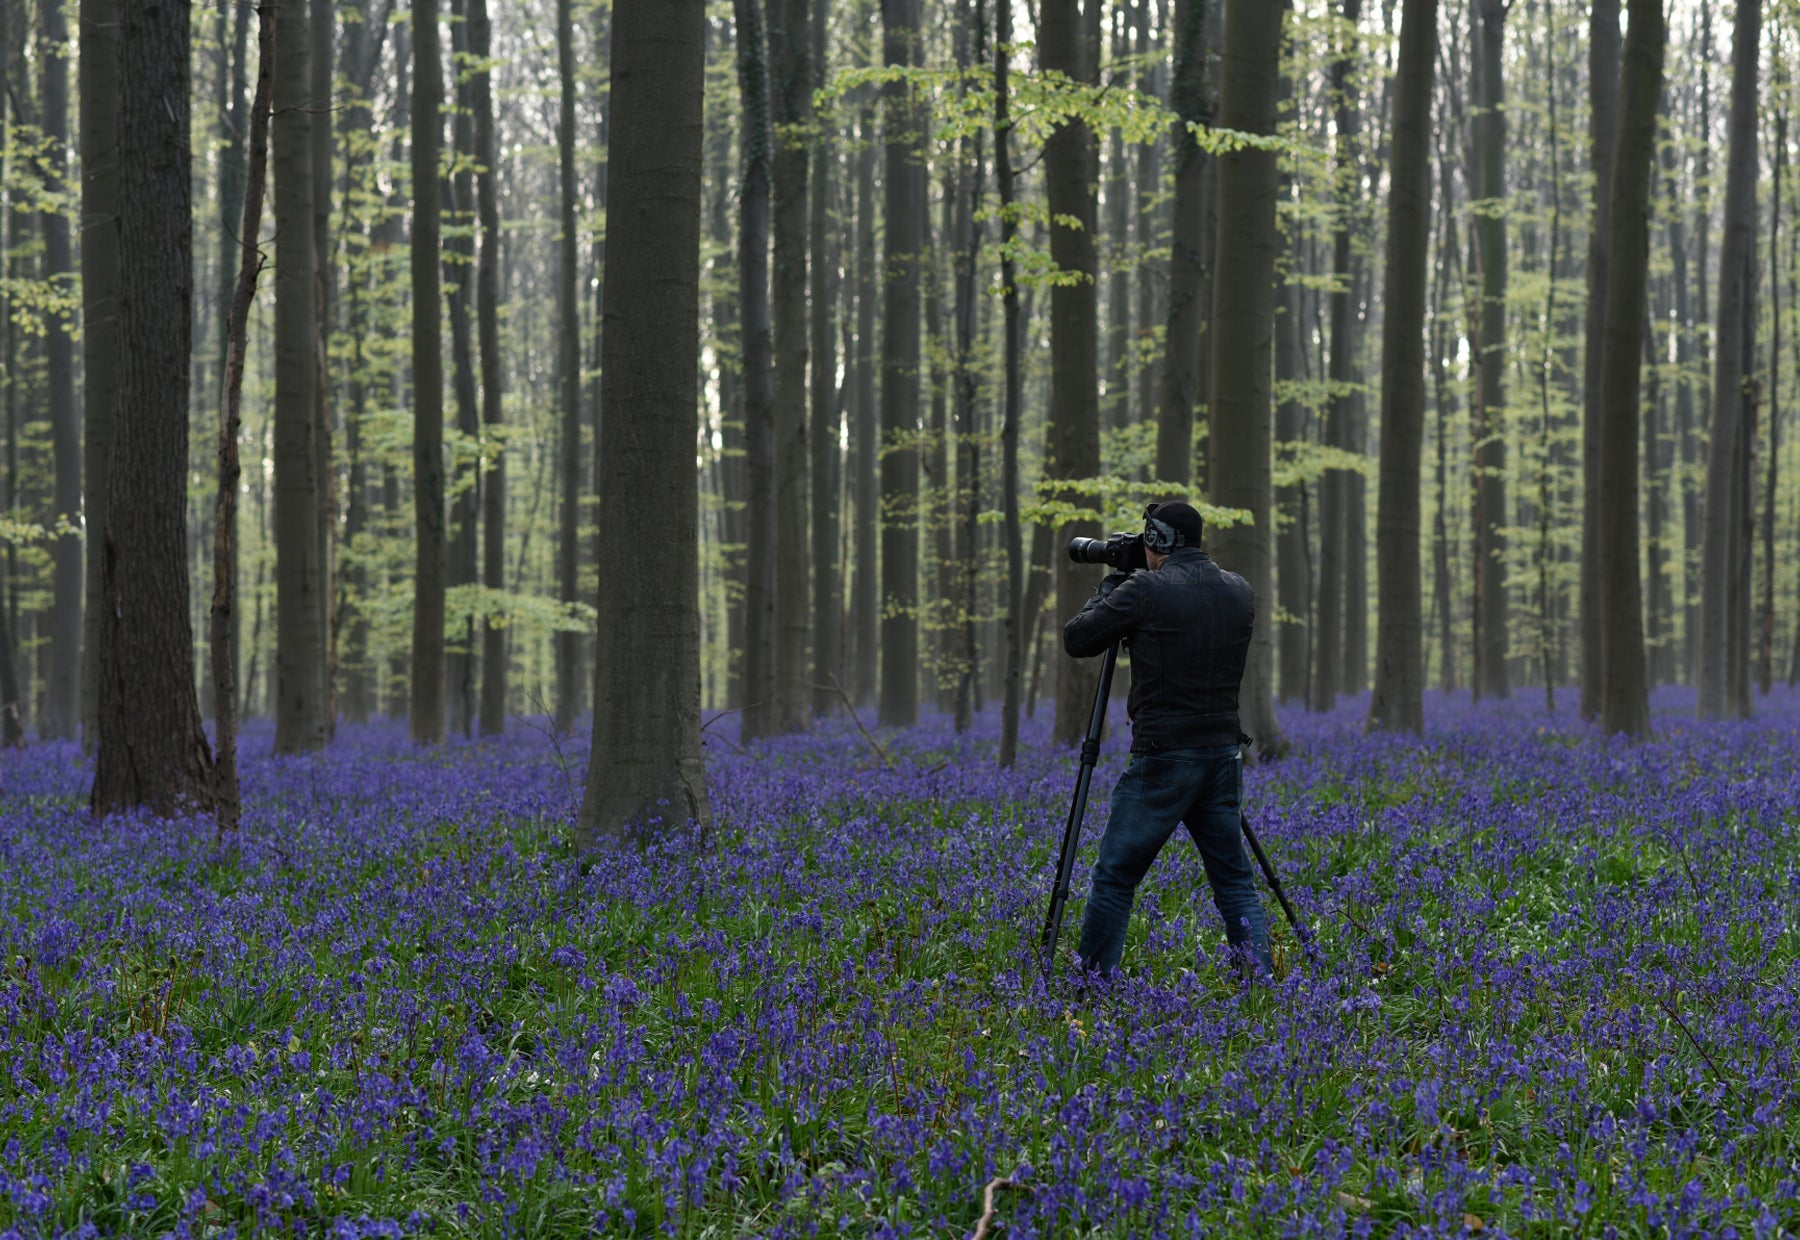 Portrait of Peter Lik taking a photograph of the woods and purple carpet of flowers in Brussels, Belgium.